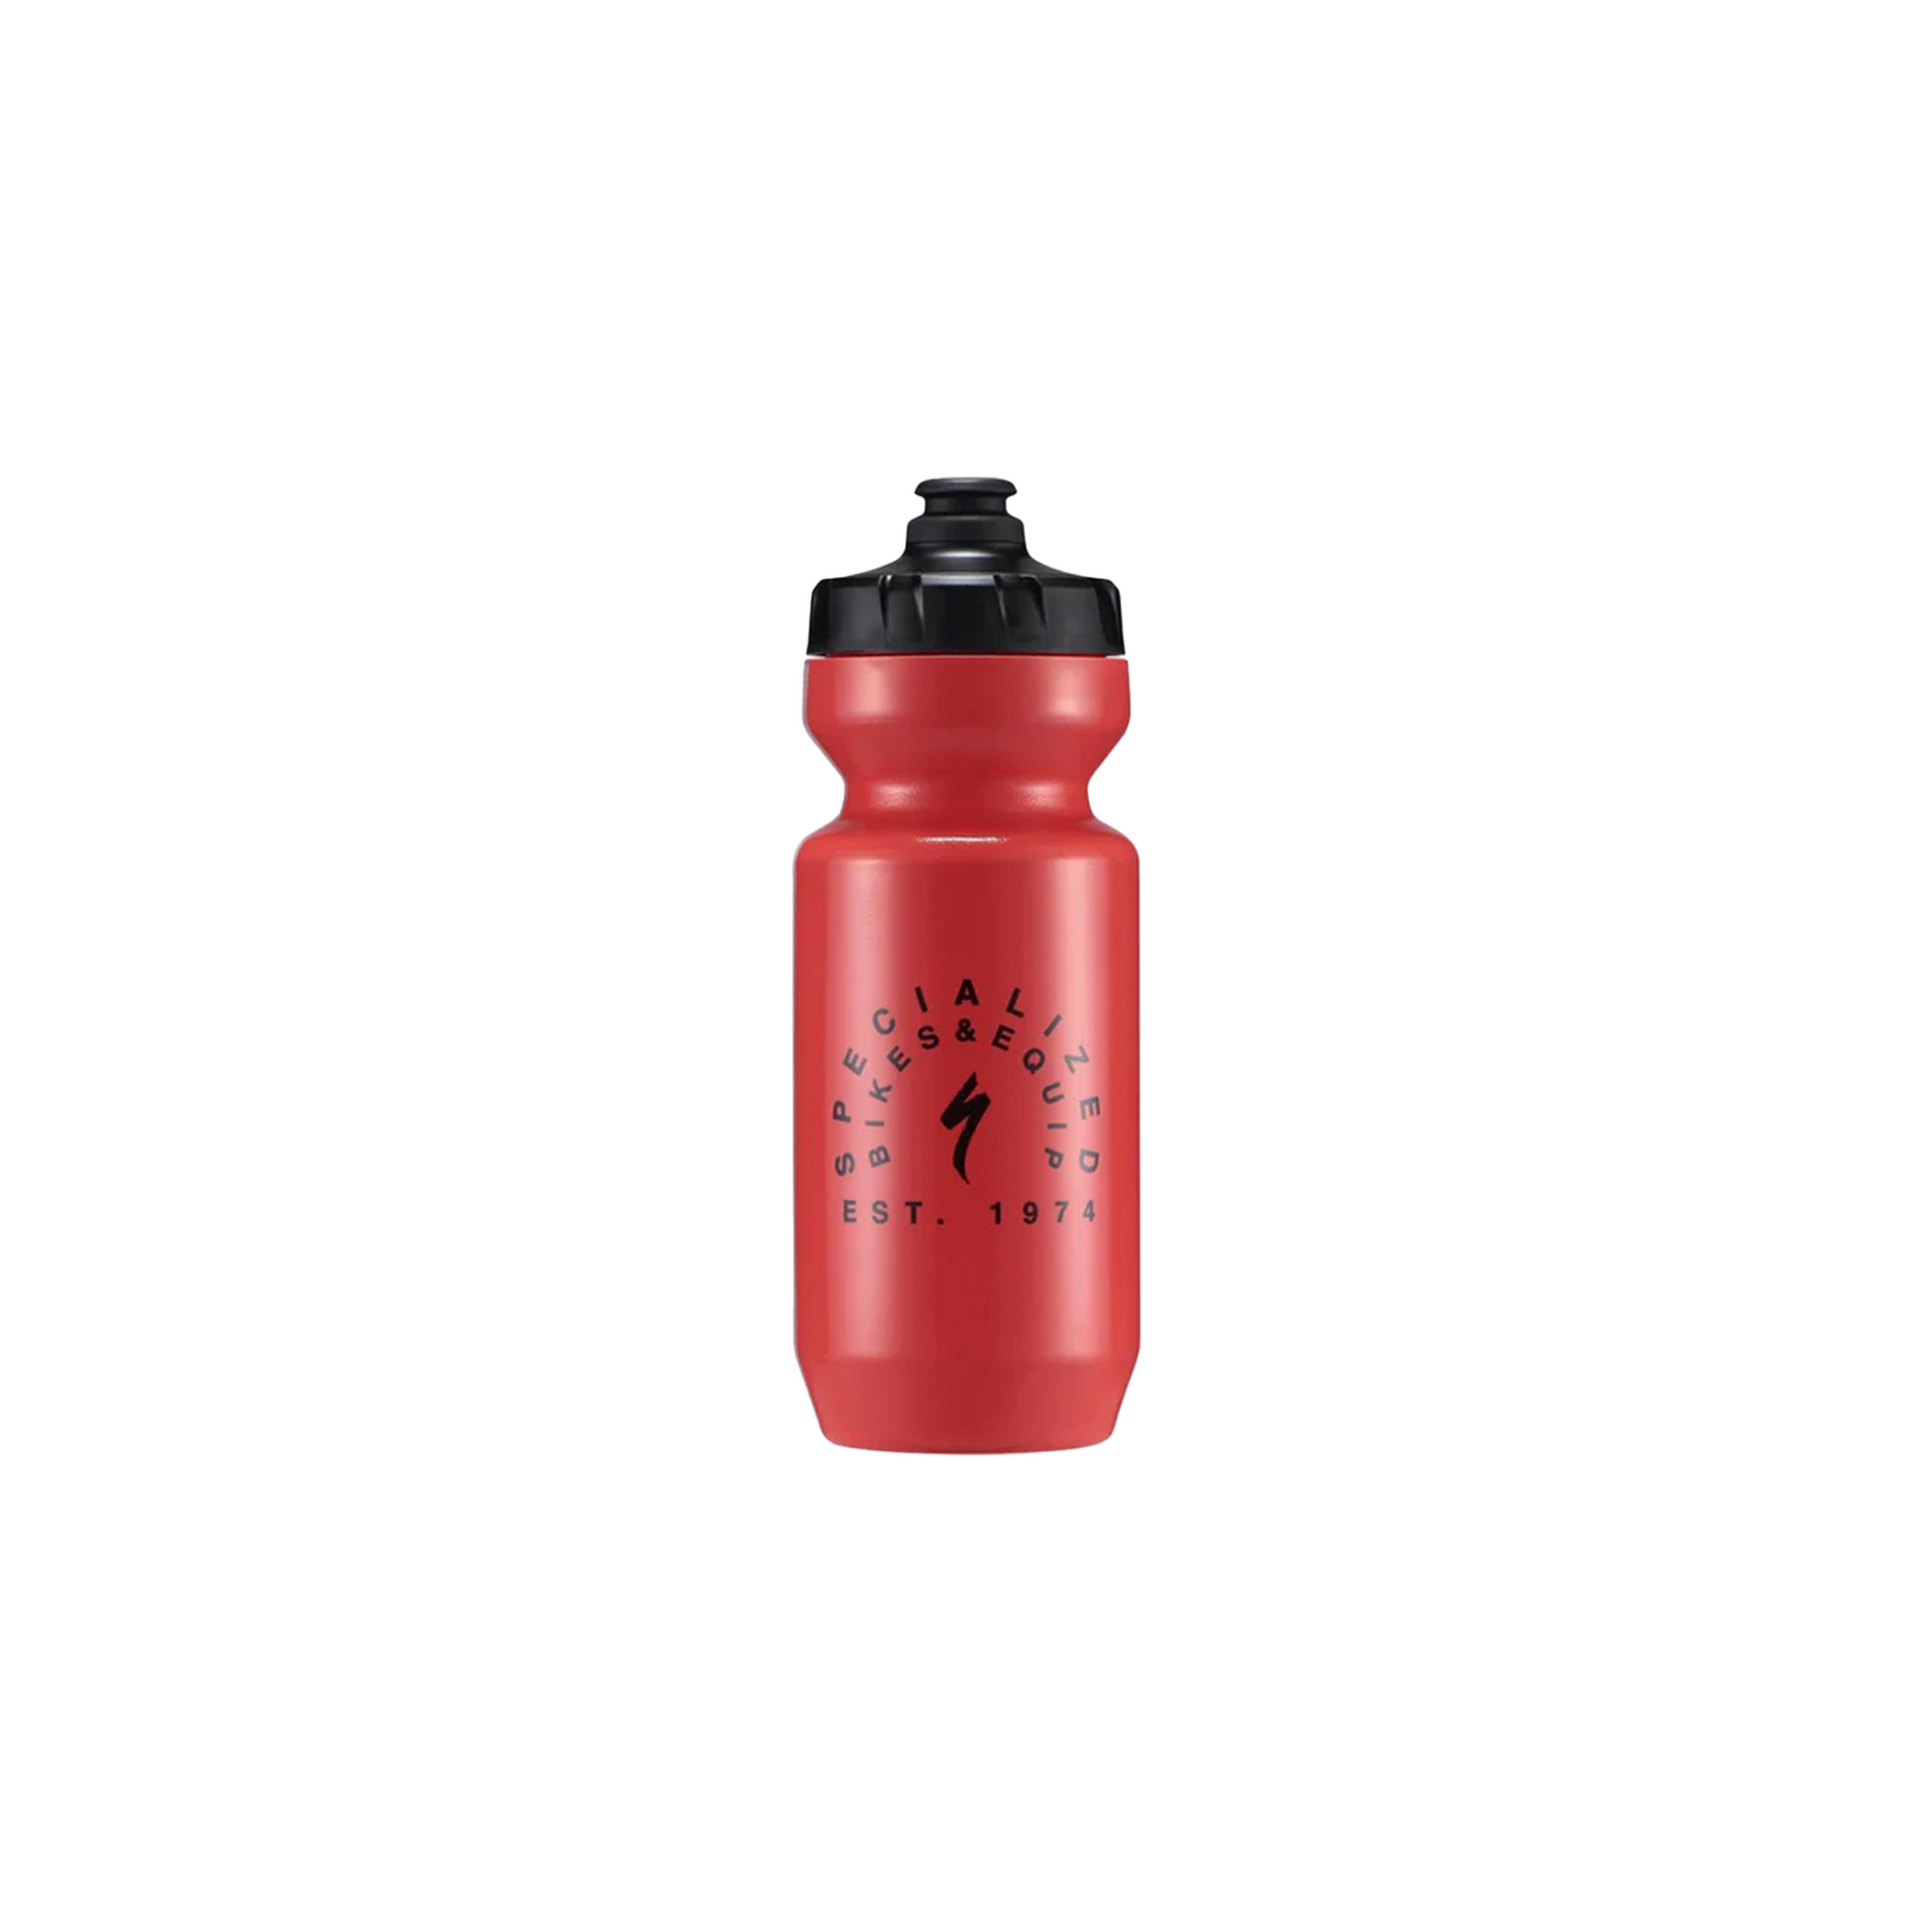 Purist MoFlo Topographic Ride - 22oz | Complete Cyclist - The Purist MoFlo Bottle features an amorphous silicon dioxide coating that's infused into the inner-wall of the bottle. Essentially, this forms a glass-like finish that provides a totally natural, and completely inert, solution to the problem of your drinks staining the bottle or leaving behind any residual aftertaste. 